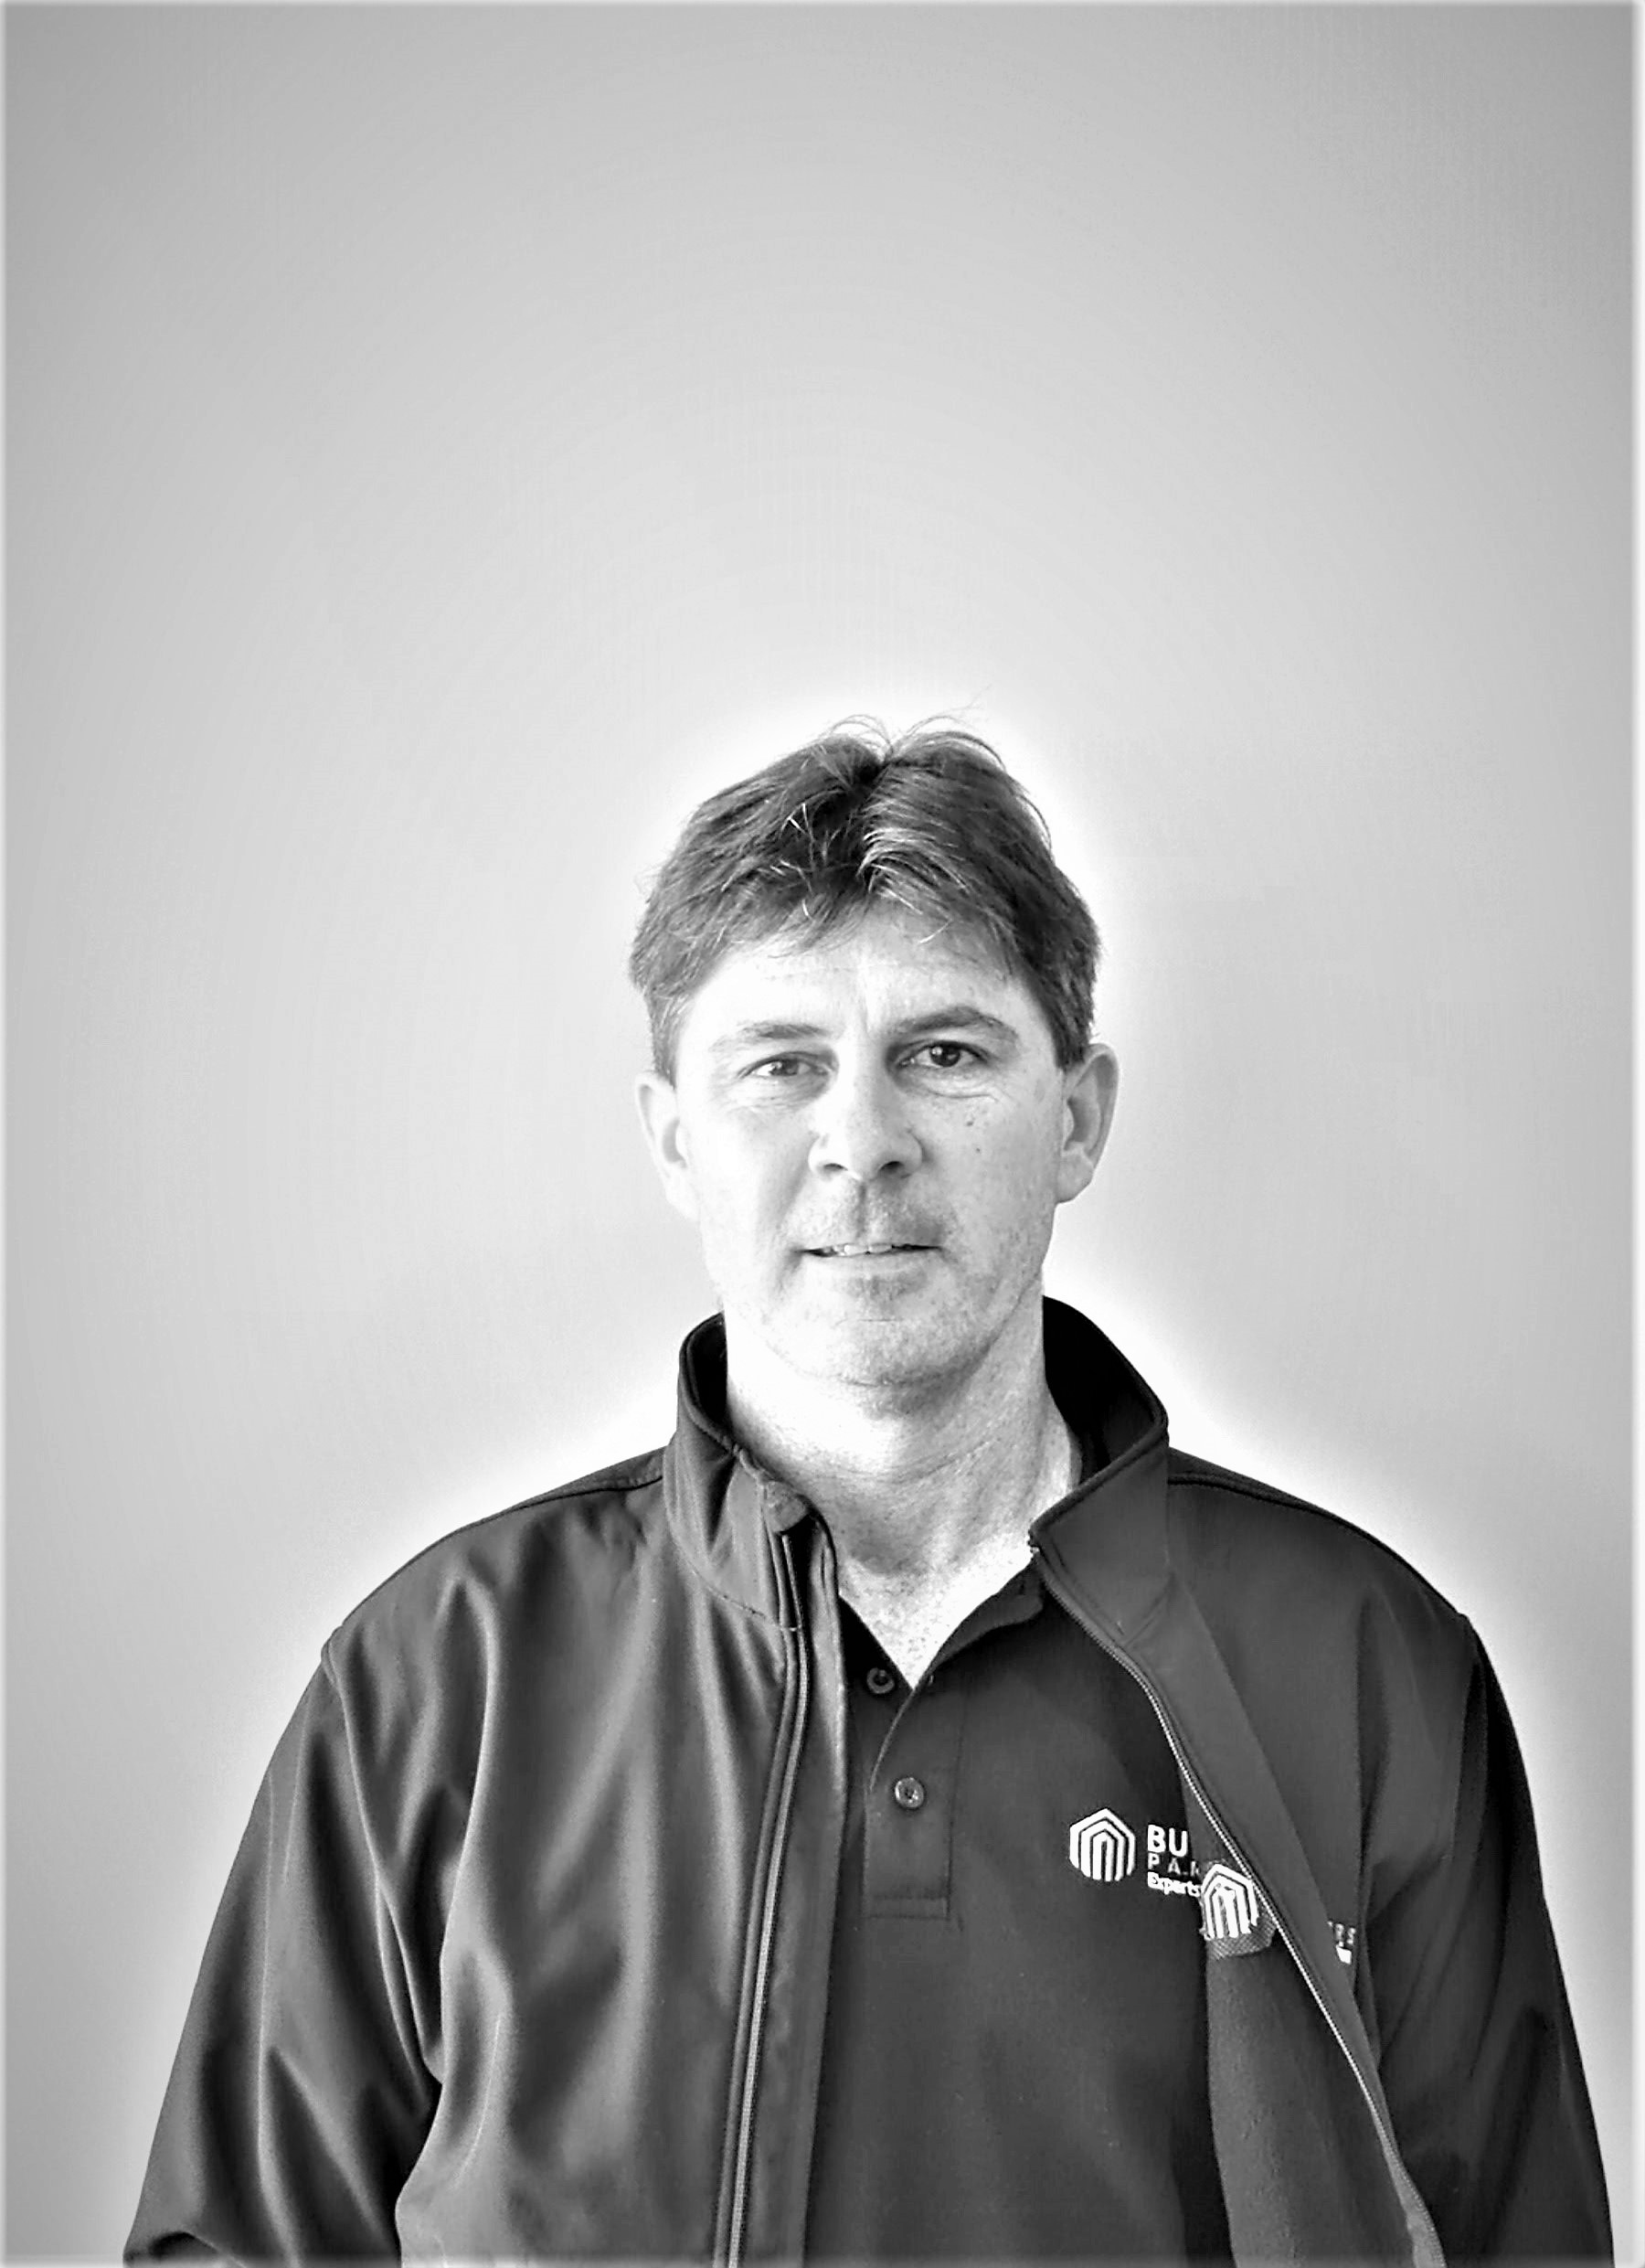 Introducing Newly Appointed Site Manager John